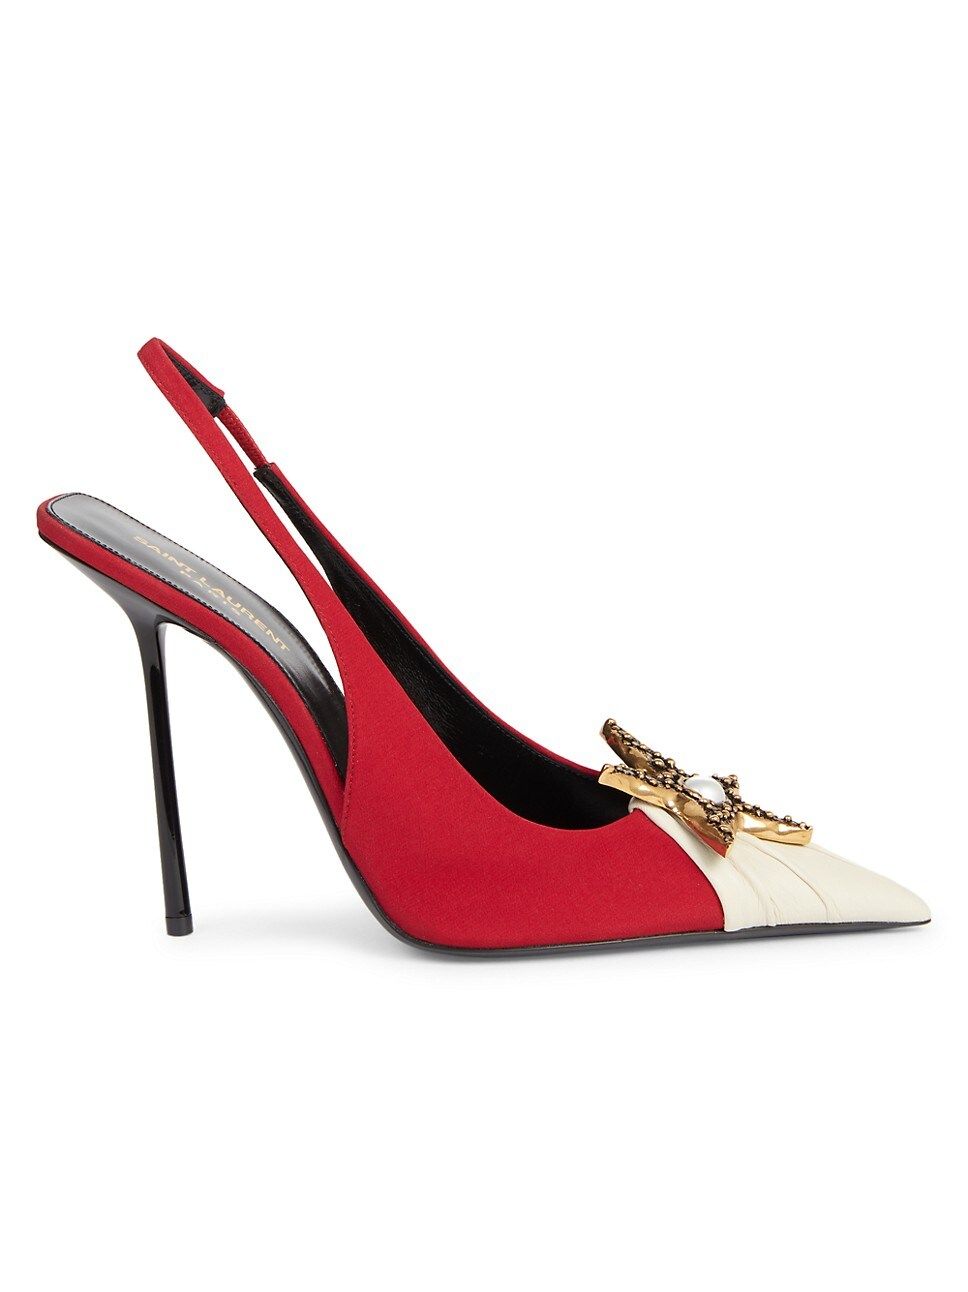 Volver Slingback Pumps In Crepe De Chine And Smooth Leather | Saks Fifth Avenue